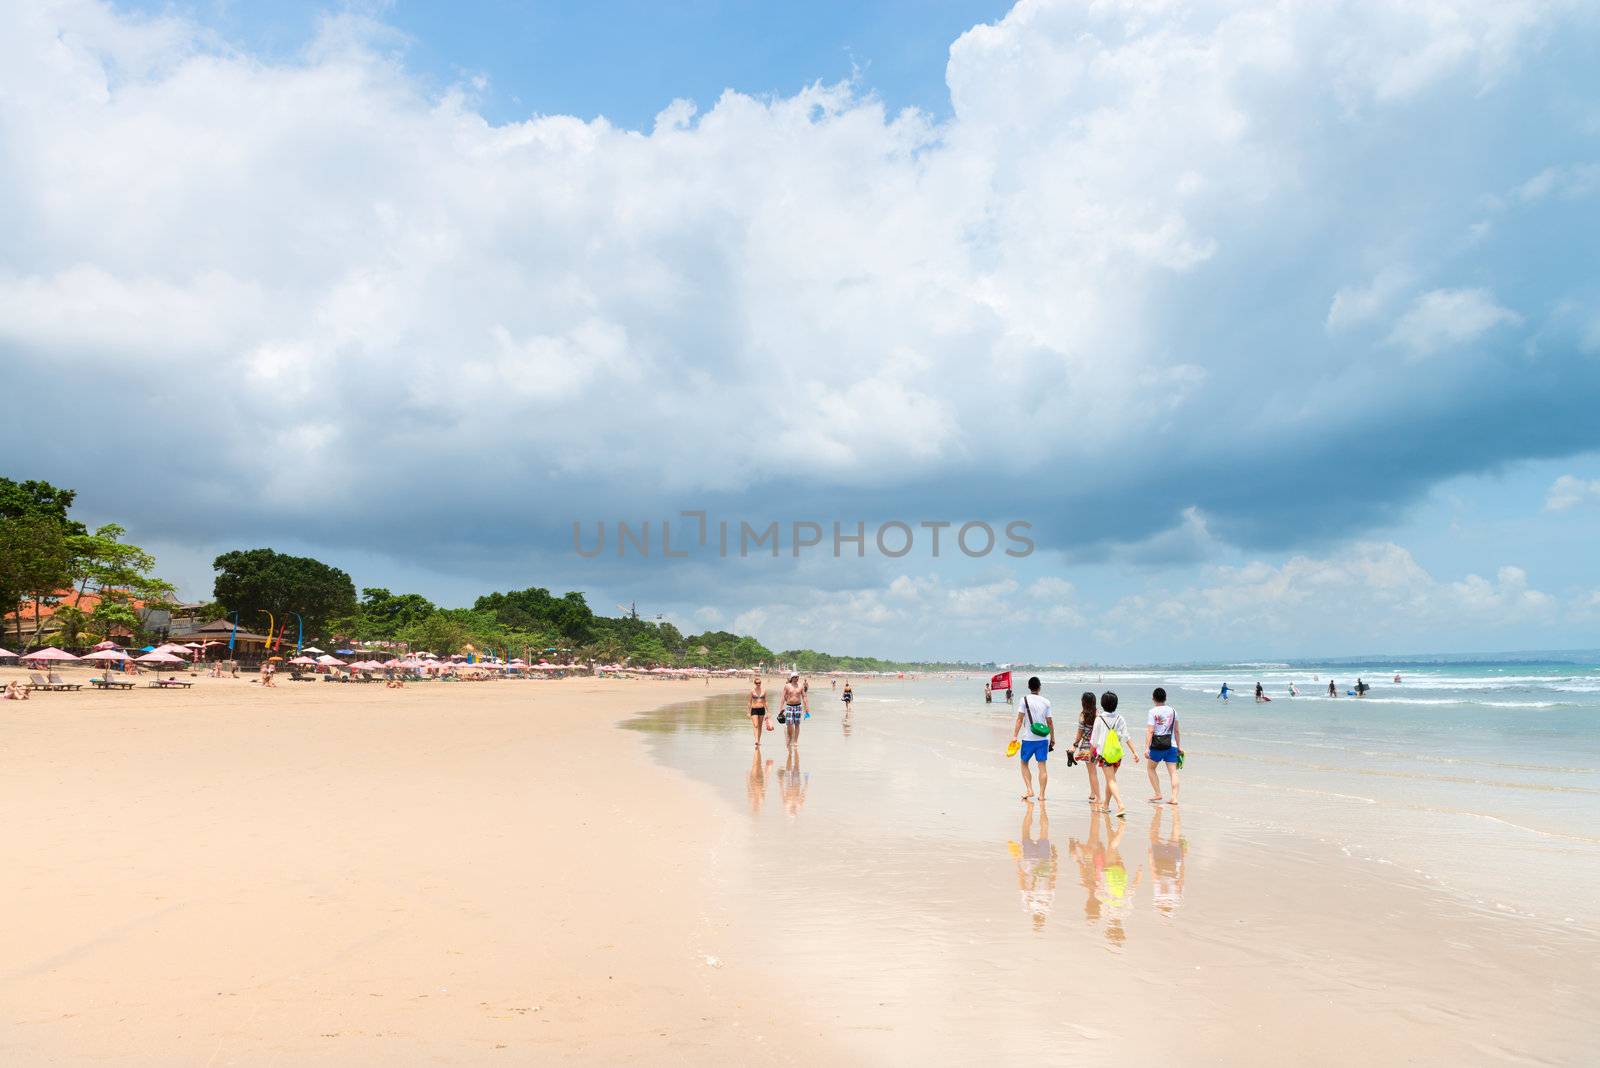 SEMINYAK, BALI - SEP 27: Wide sand beach with tourists, umbrellas and beds on Sep 27, 2012 in Seminyak, Bali, Indonesia. The five km long sandy stretch of Kuta is arguably the best beach front in Bali.  